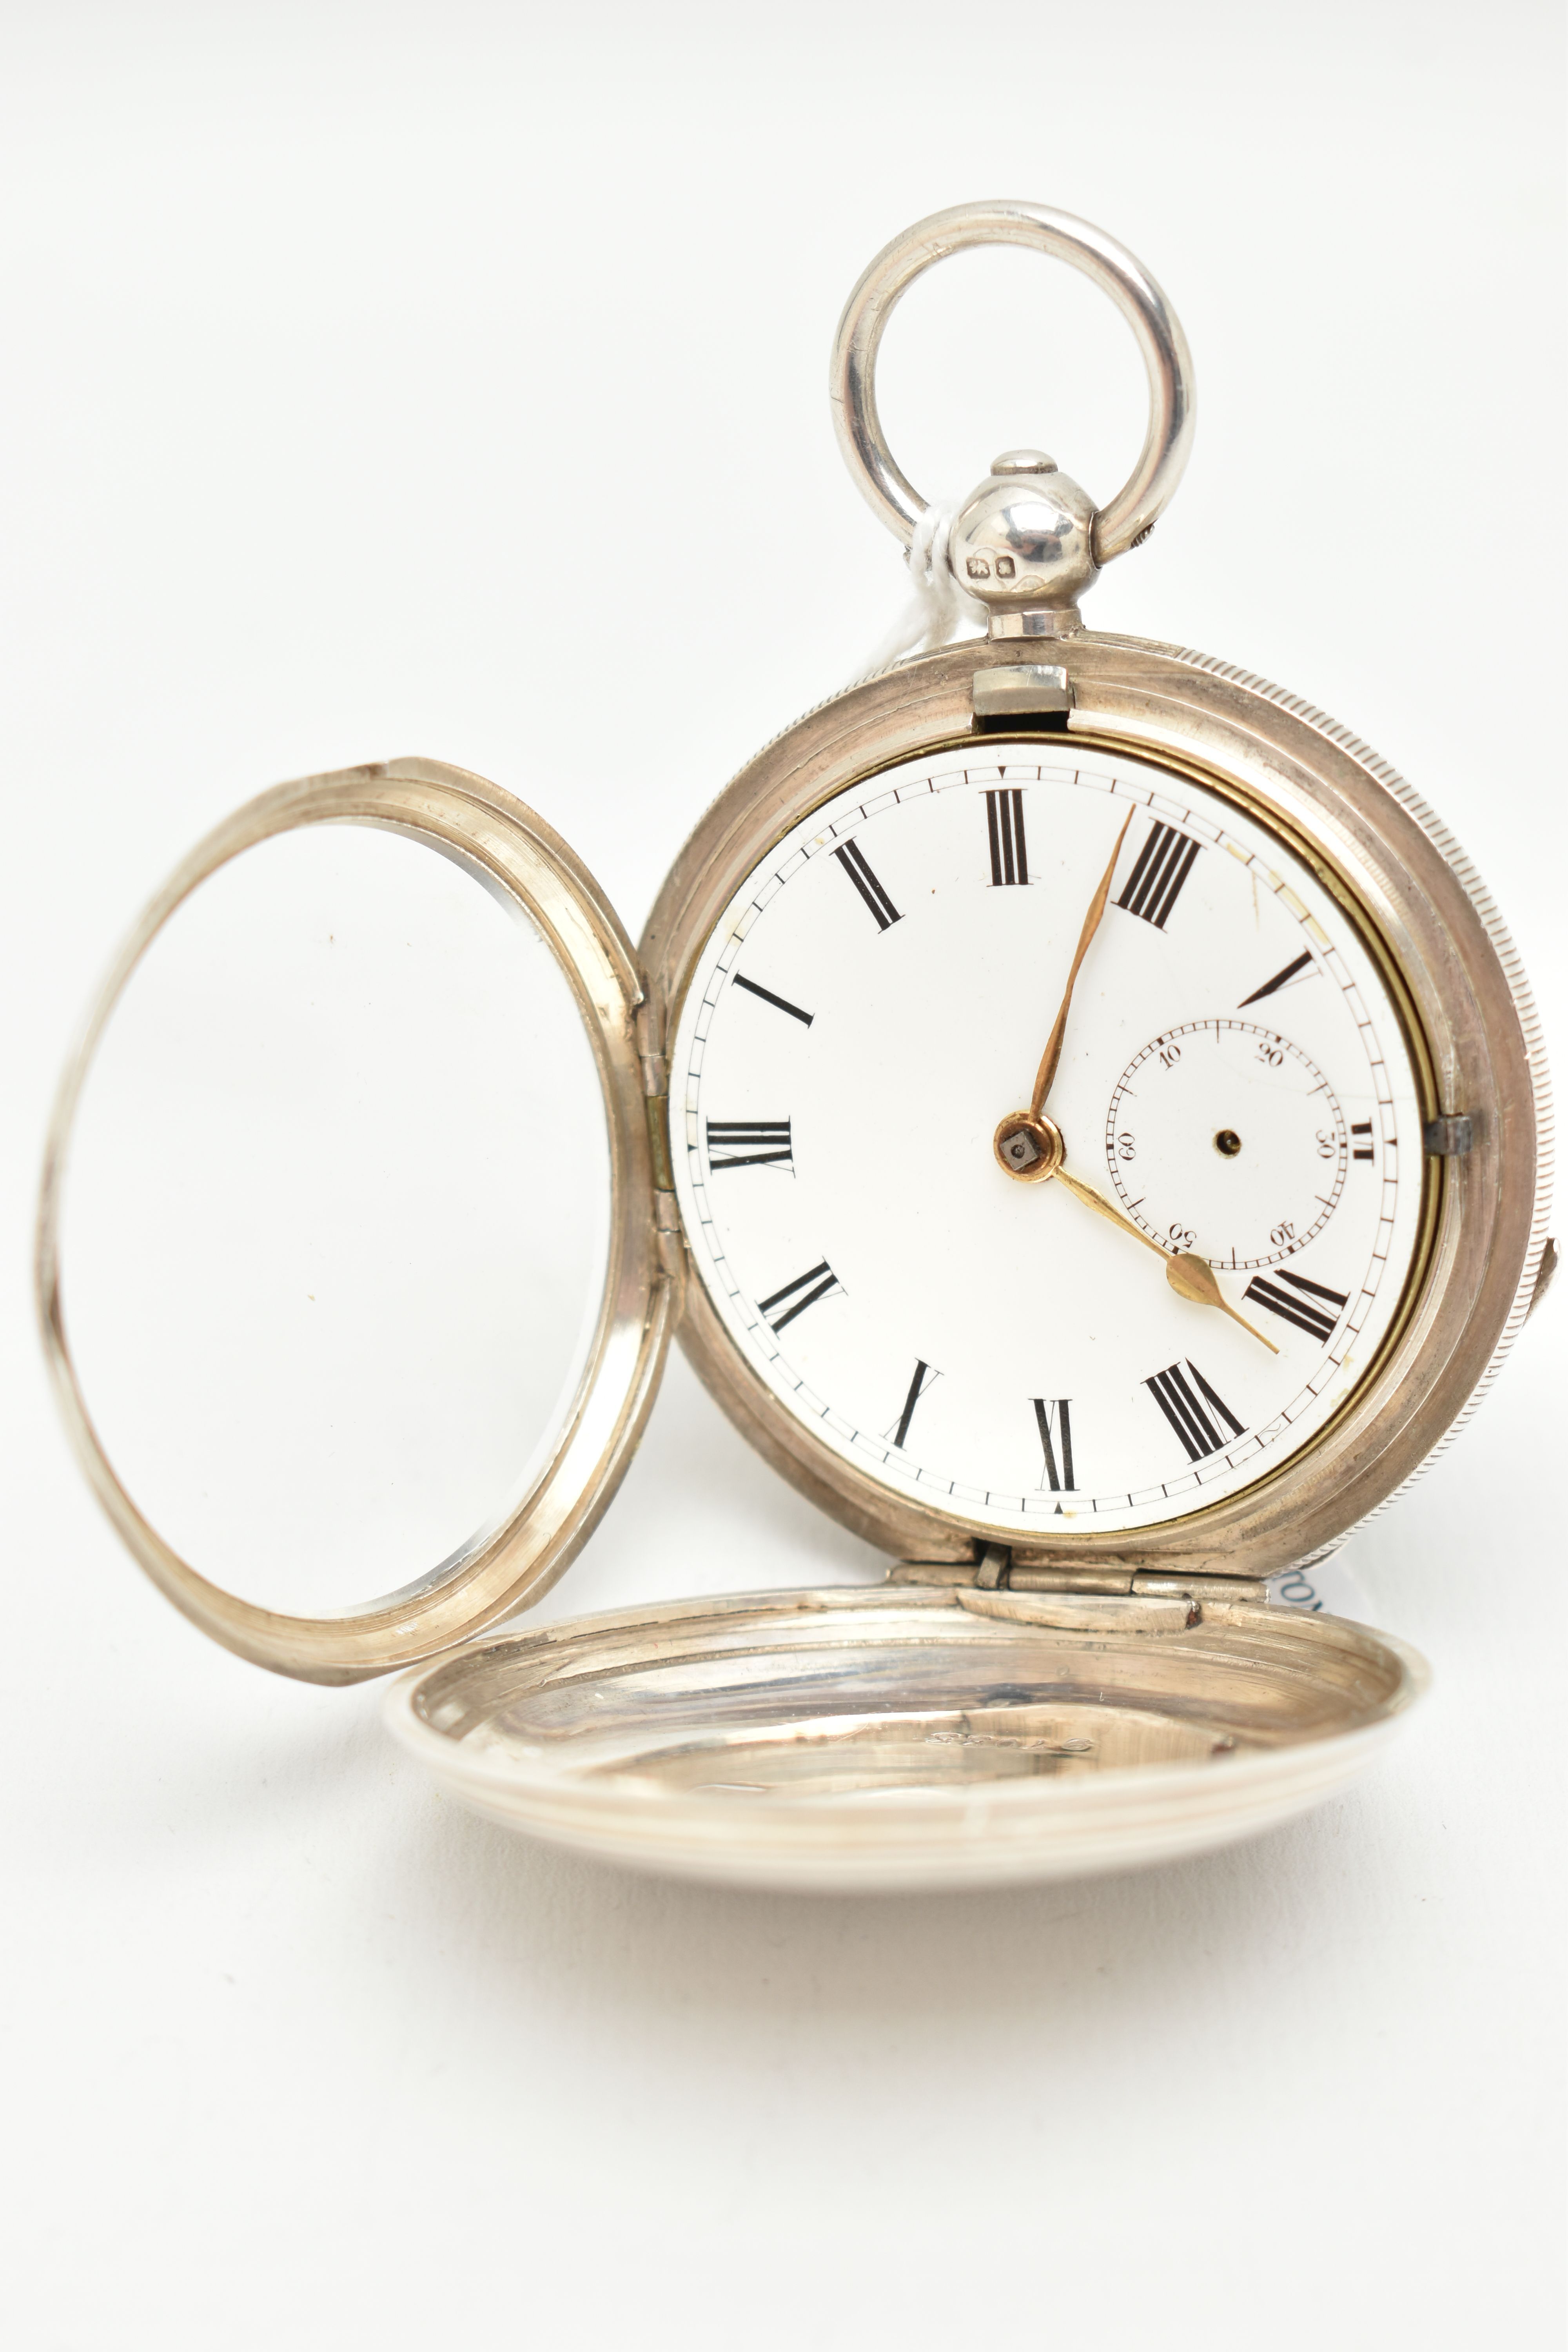 AN EDWARDIAN SILVER FULL HUNTER POCKET WATCH, key wound movement, Roman numerals, second - Image 5 of 6